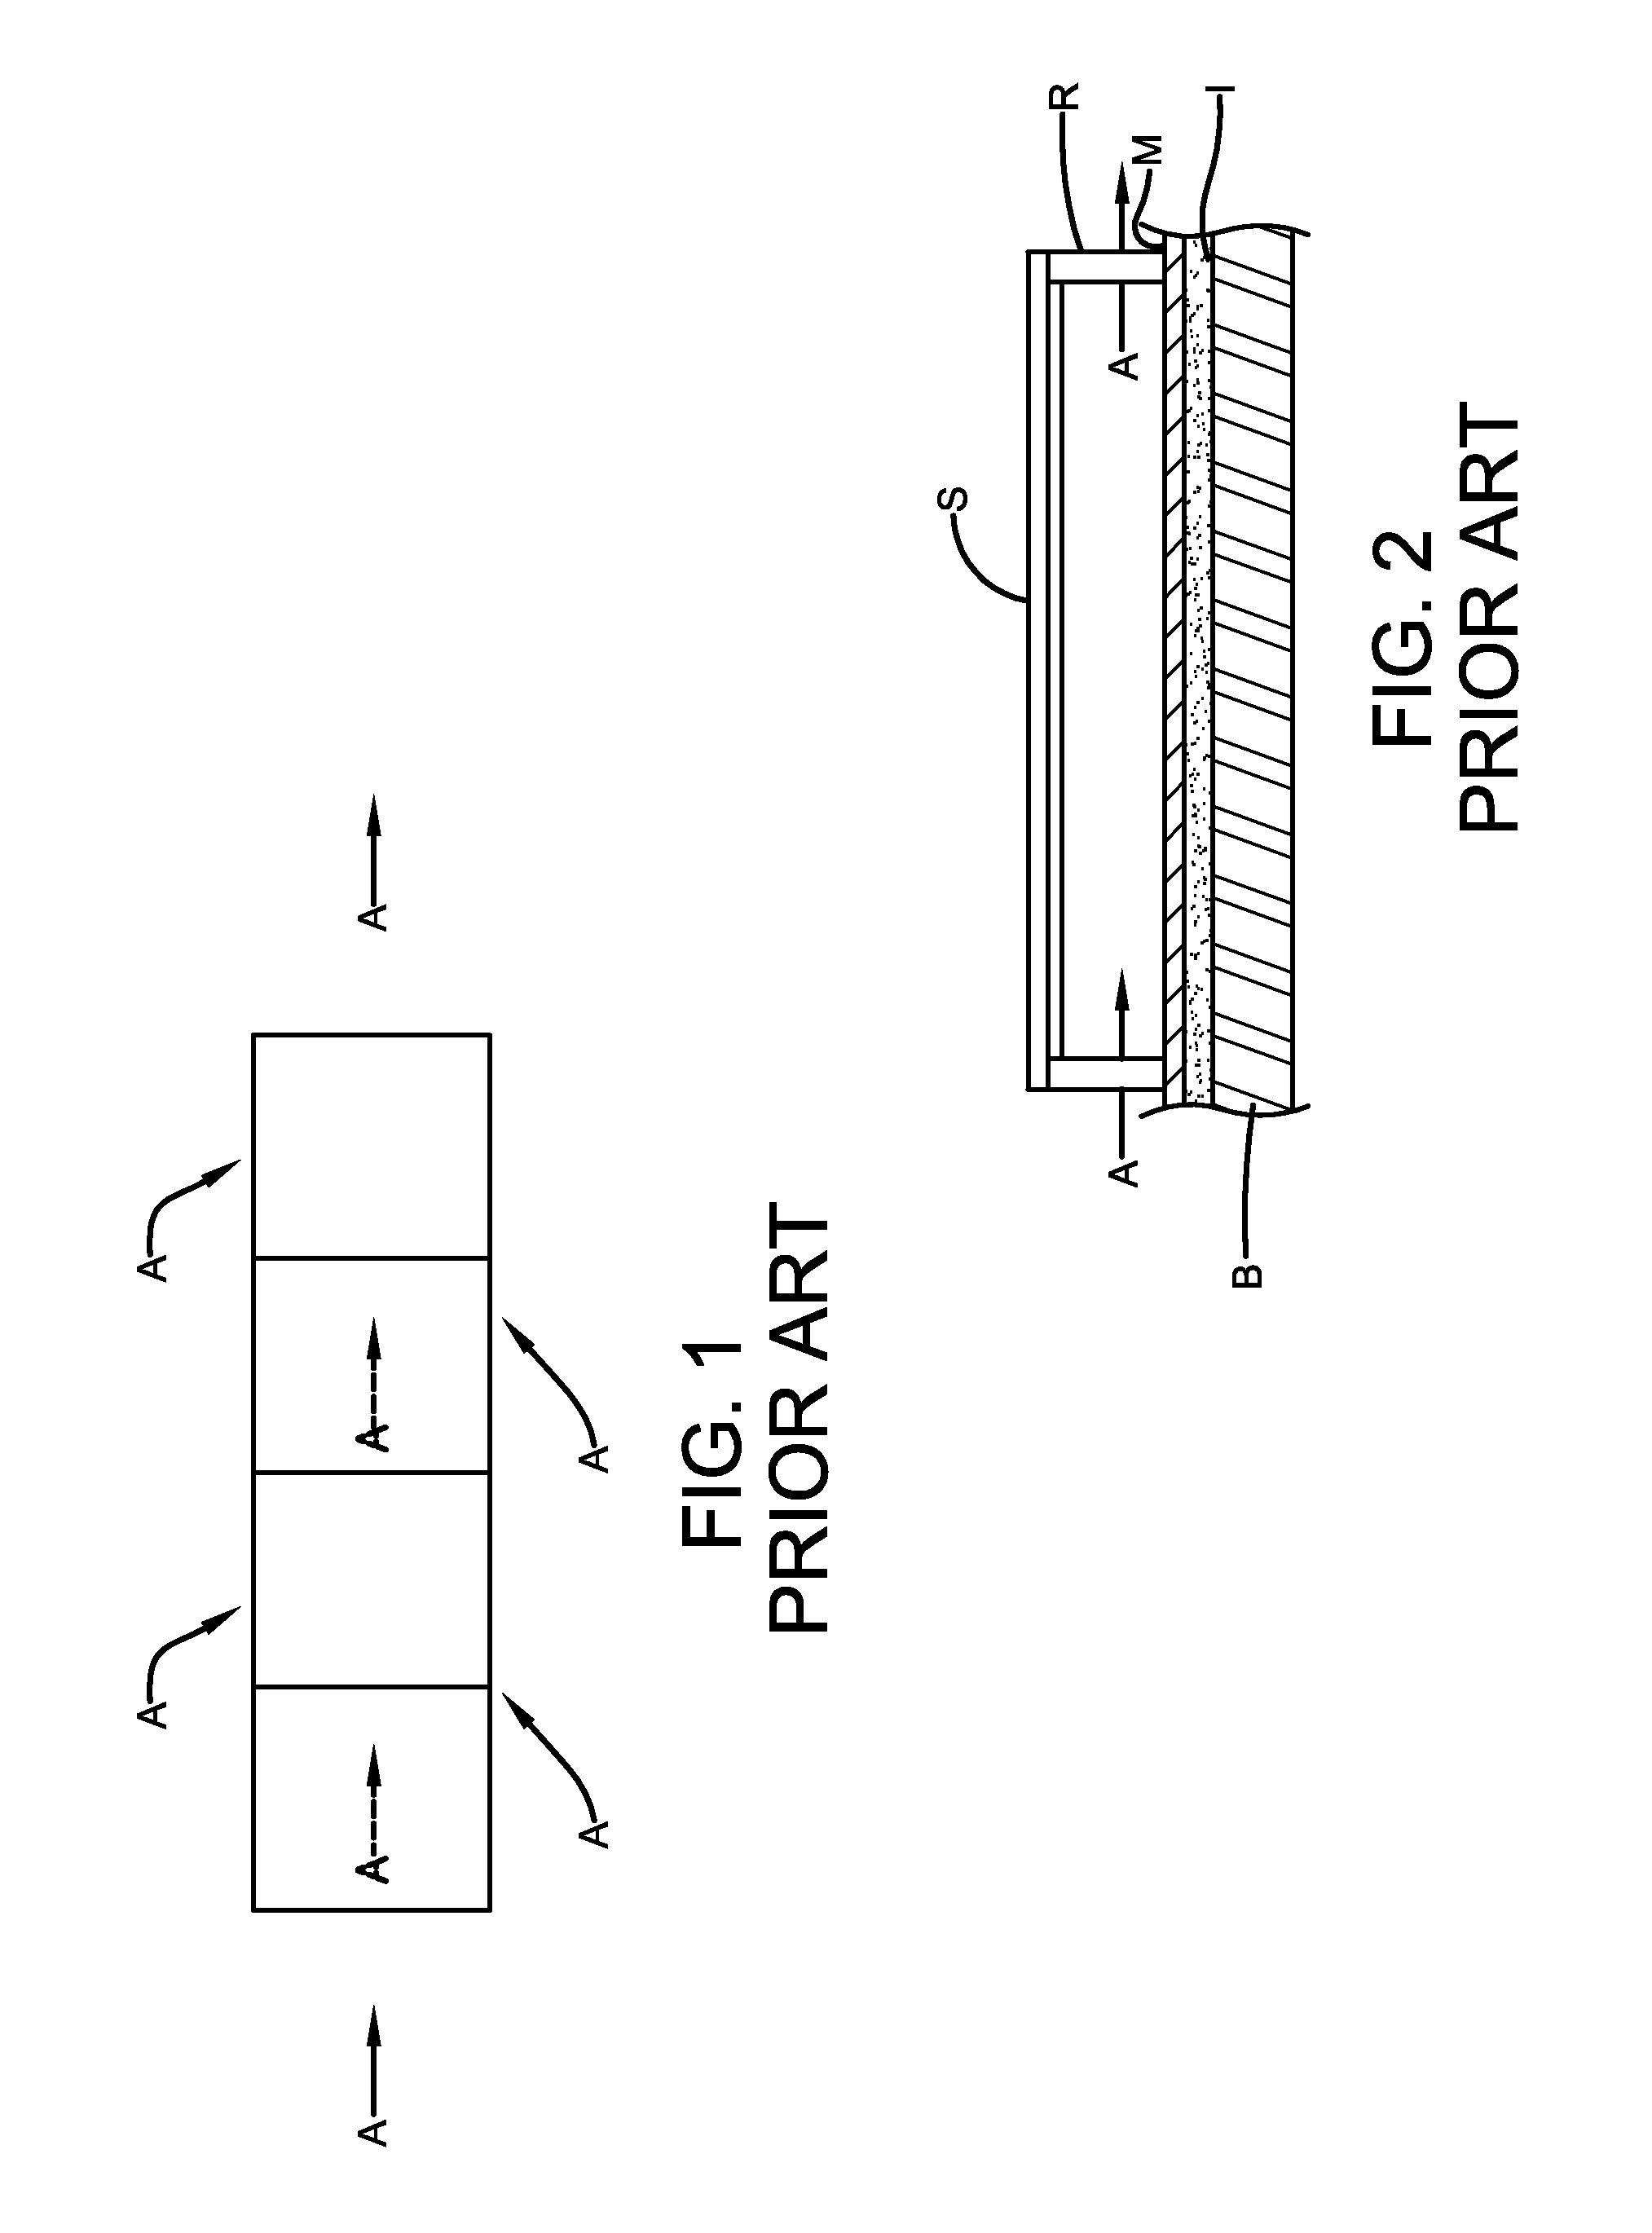 Solar panel assembly with movable barriers